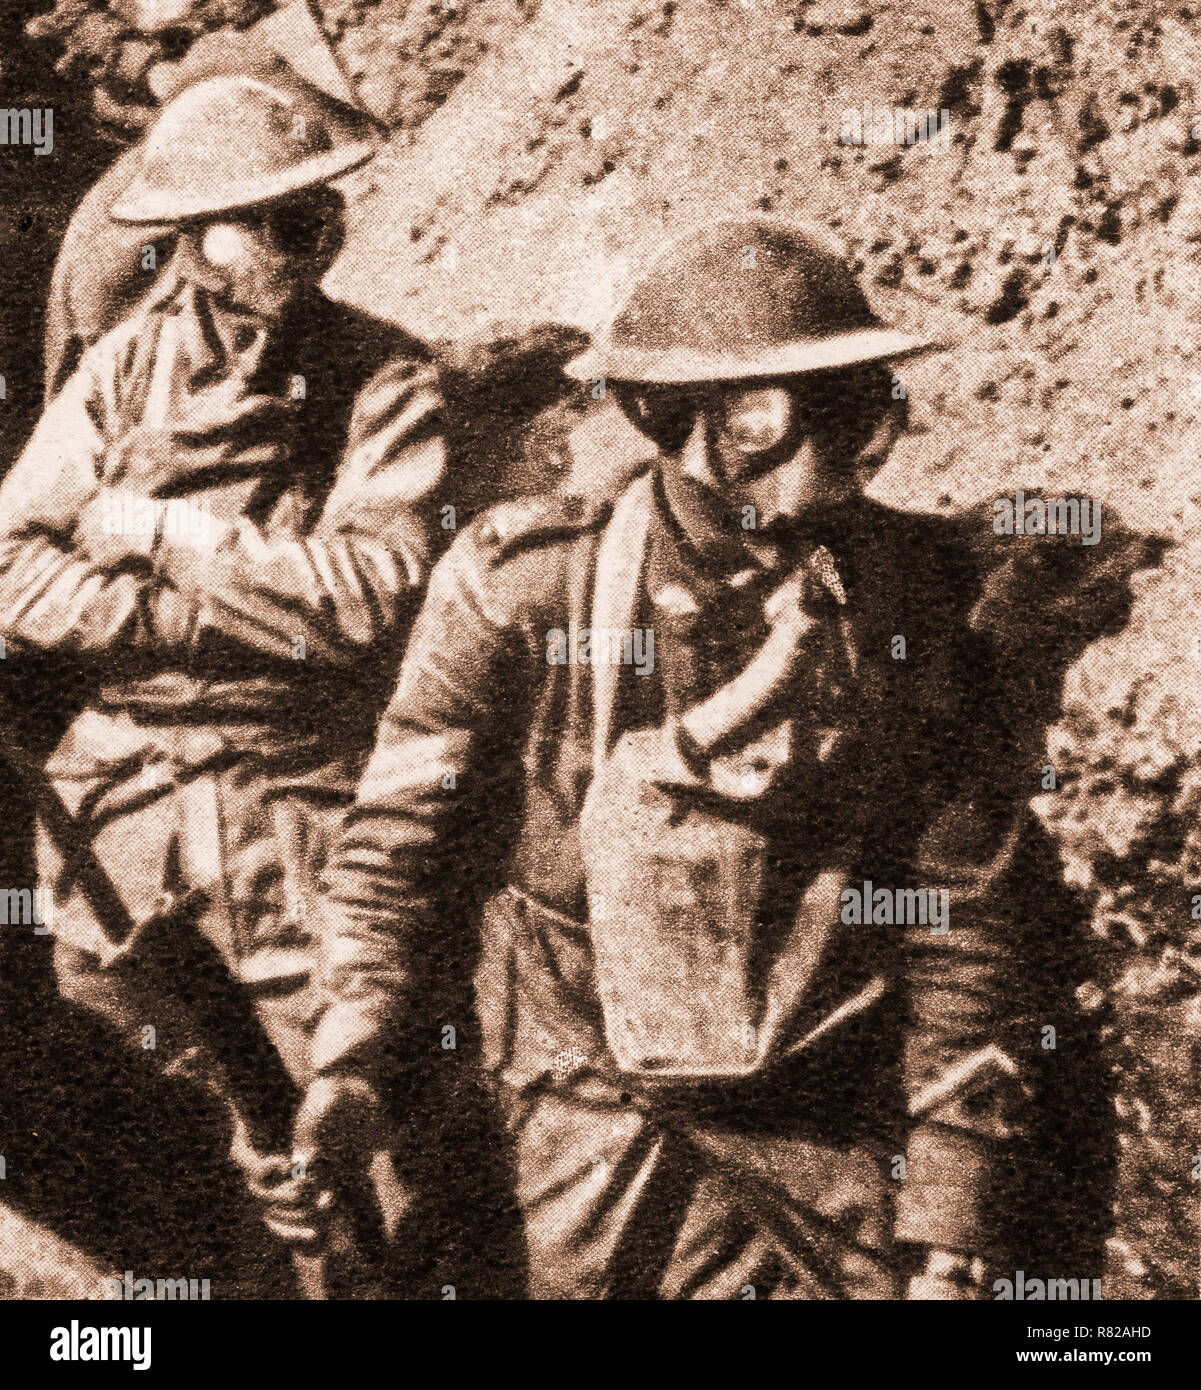 British soldiers with gas masks following the use of of poisoned gas first used in April 1915. Either Chlorine or Mustard Gas was  released from cylinders in a dense cloud or fired in shells to become a regular offensive weapon on both sides of the conflict. Stock Photo